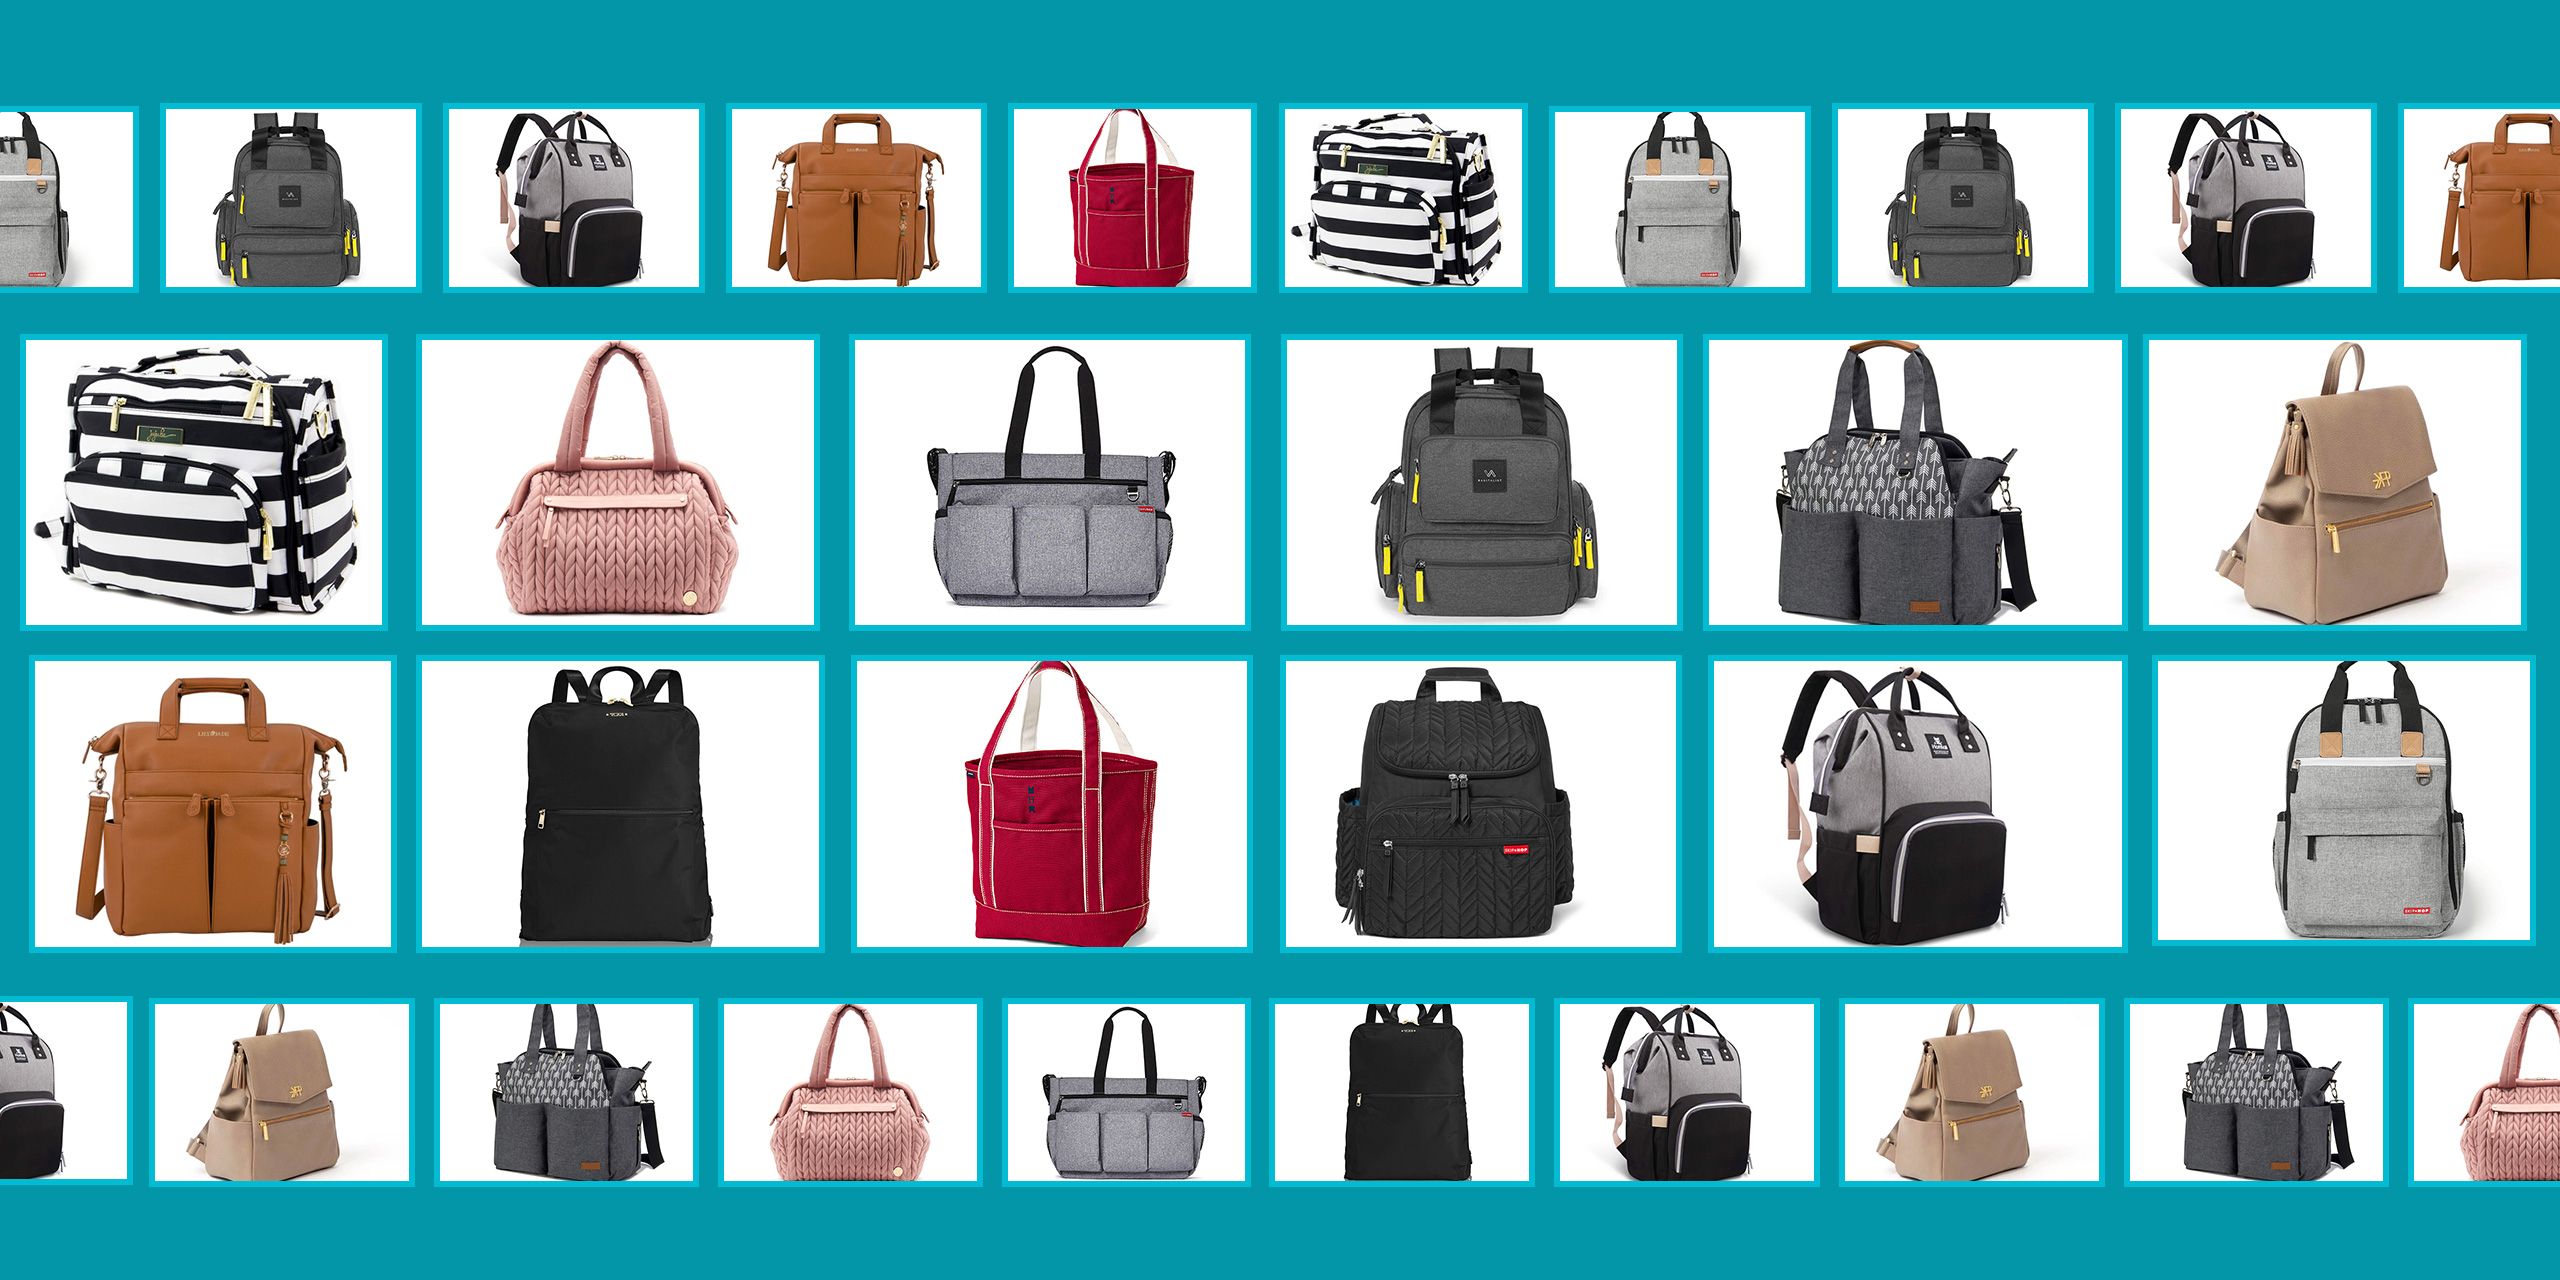 best place to buy diaper bags